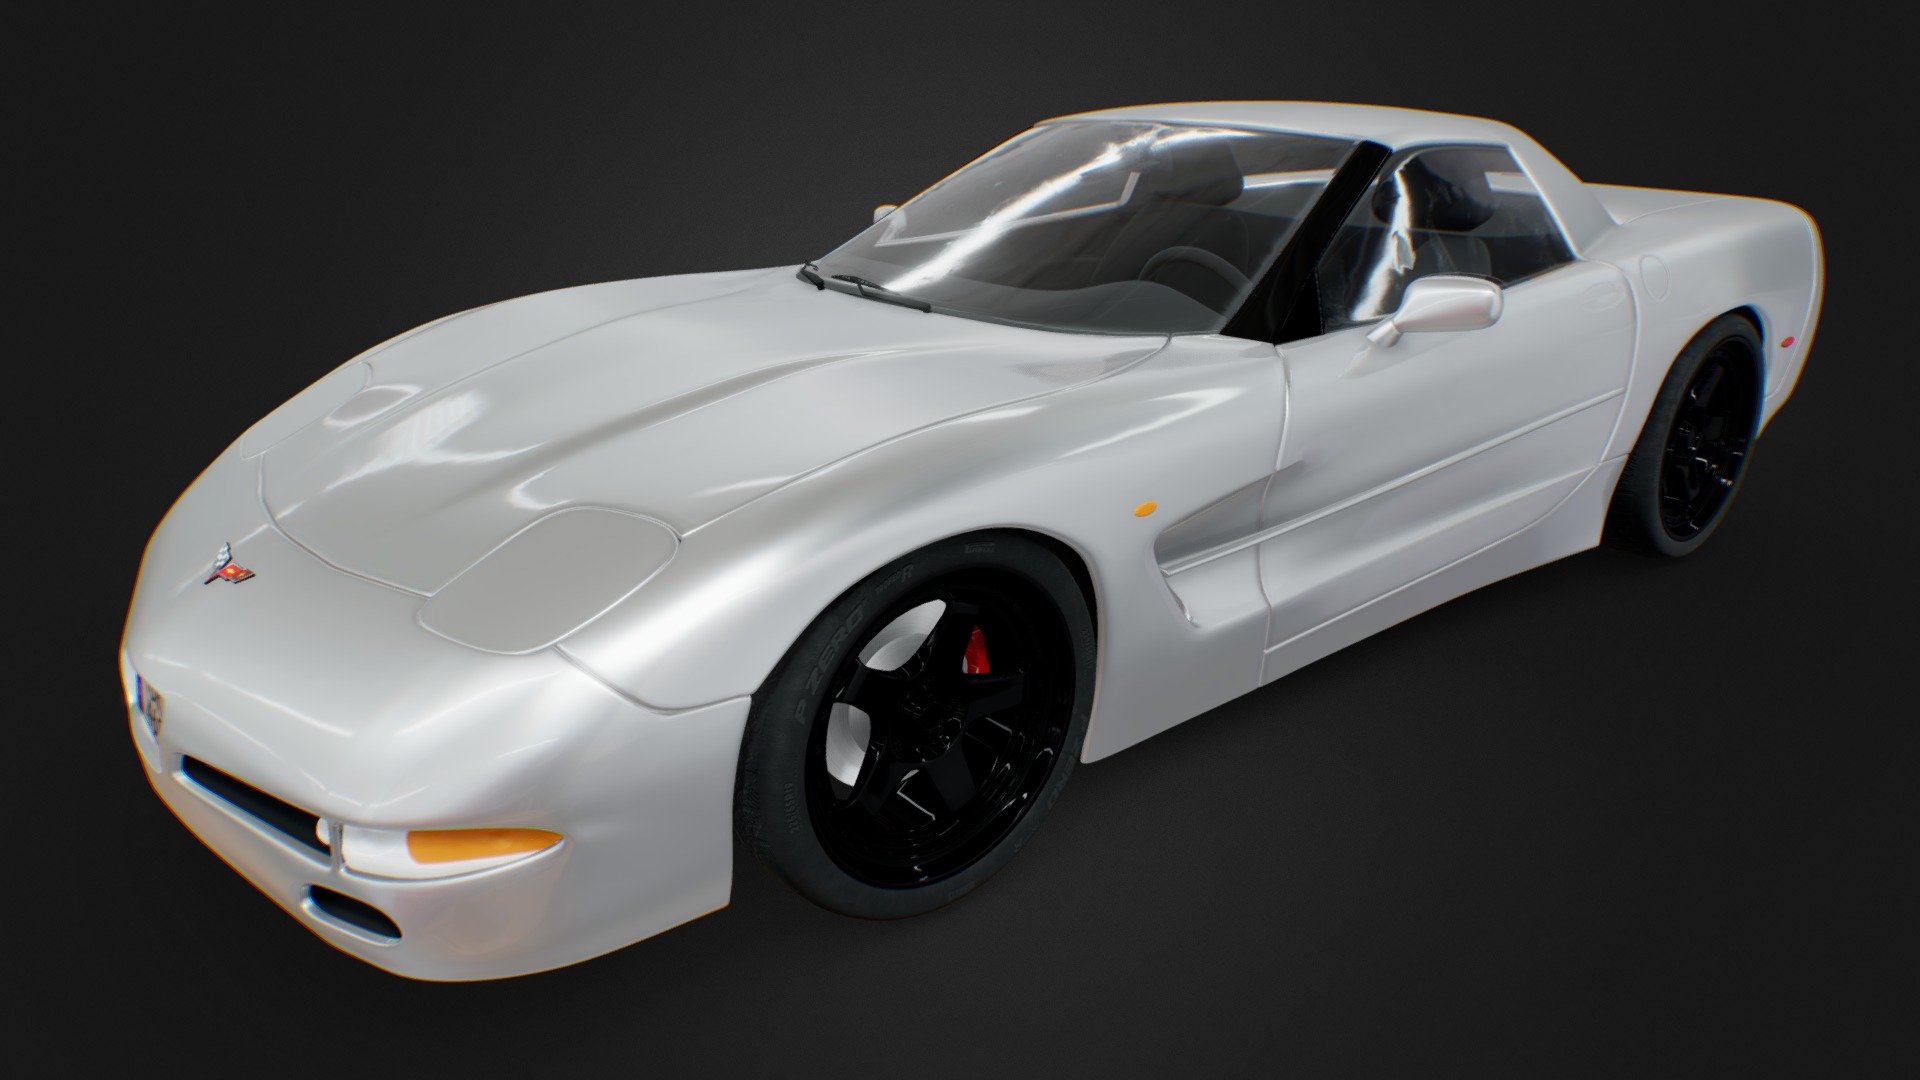 This is a high quality model of the Chevrolet Corvette C5 from 1997. The model has a fully textured design for close-up renders, and was modeled in Blender 3.1, textured in Substance Painter and rendered in Blender/Cycles.

The Chevrolet Corvette (C5) is the fifth generation of the Chevrolet Corvette sports car, produced by the Chevrolet division of General Motors for the 1997 through 2004 model years. Production variants include the high performance Z06. Racing variants include the C5-R, a 24 Hours of Daytona and 24 Hours of Le Mans GTS/GT1 class winner.

If you like this model please give it a like. 🙂⭐️

Made by tiedtke.

Thank you! - Chevrolet Corvette C5 (Z06) High Poly - 3D model by tiedtke 3d model